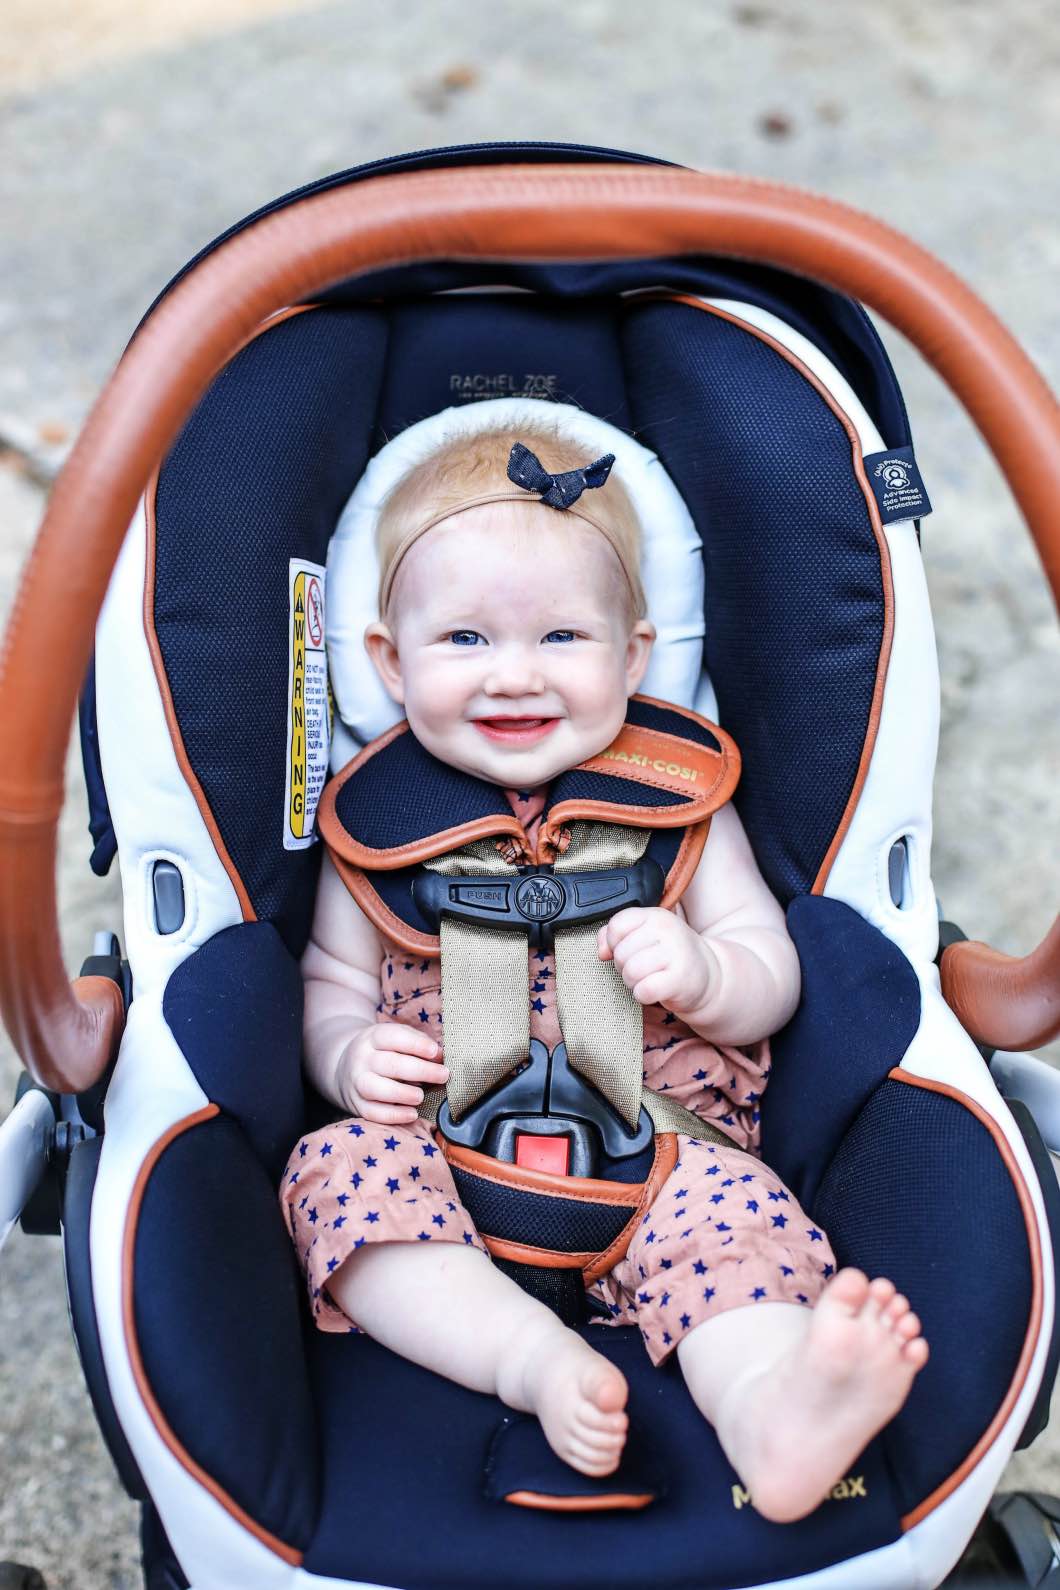 Rachel Zoe Maxi Cosi Stroller Collaboration by lifestyle blogger Jessica of Happily Hughes